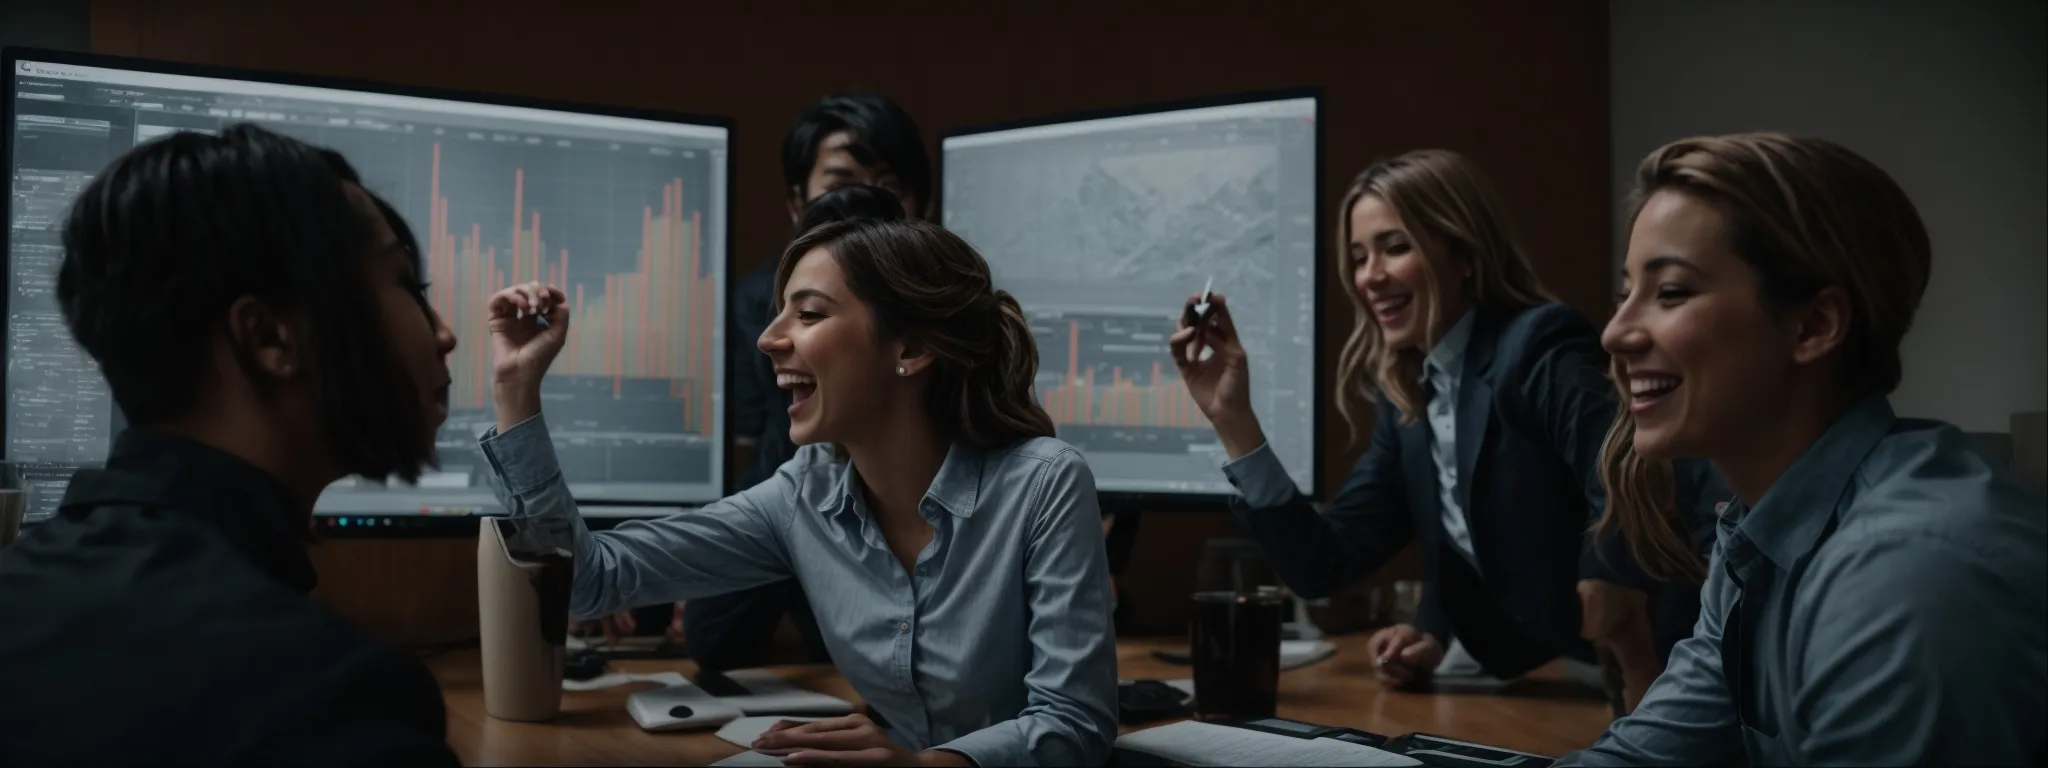 a group of excited marketing professionals celebrating as they view a computer screen showing rising analytics graphs.